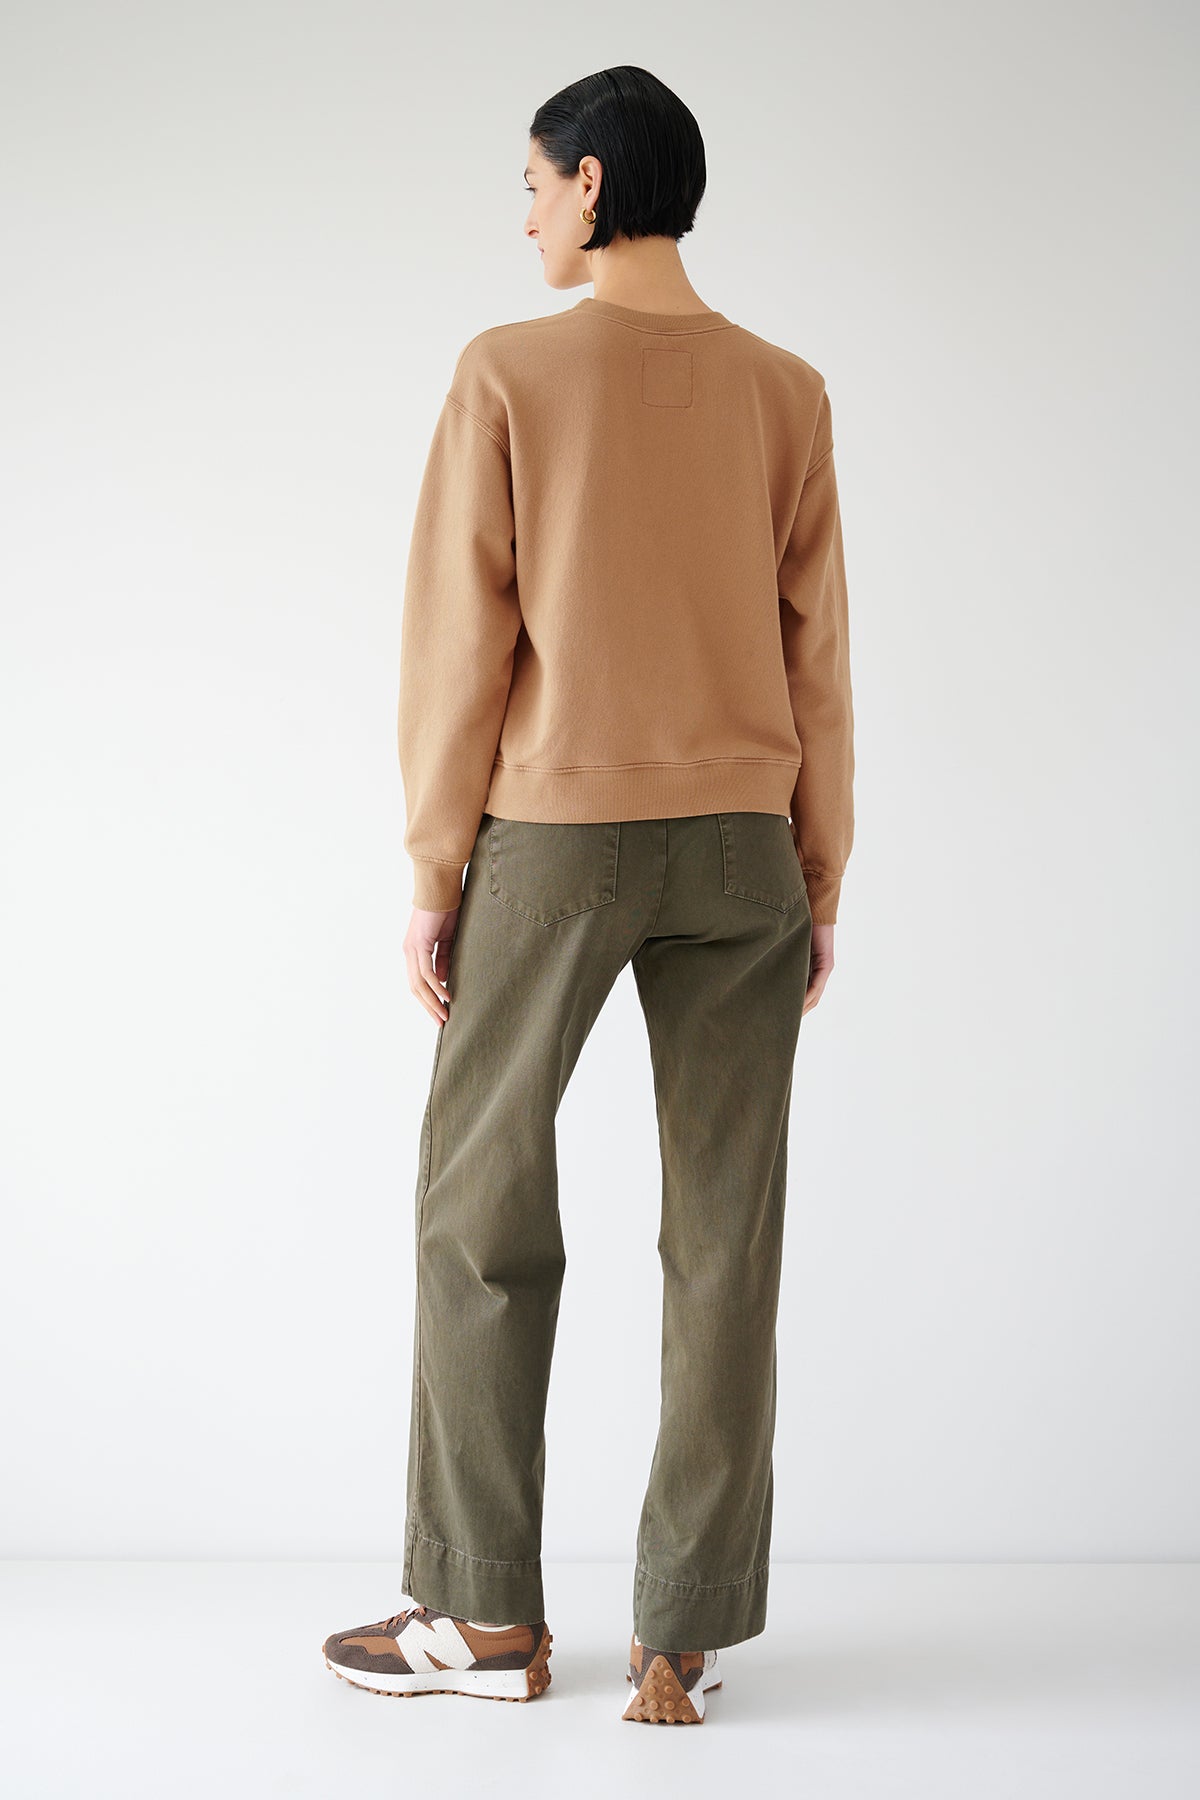 The back view of a woman wearing a Velvet by Jenny Graham YNEZ SWEATSHIRT and olive pants.-35547451064513